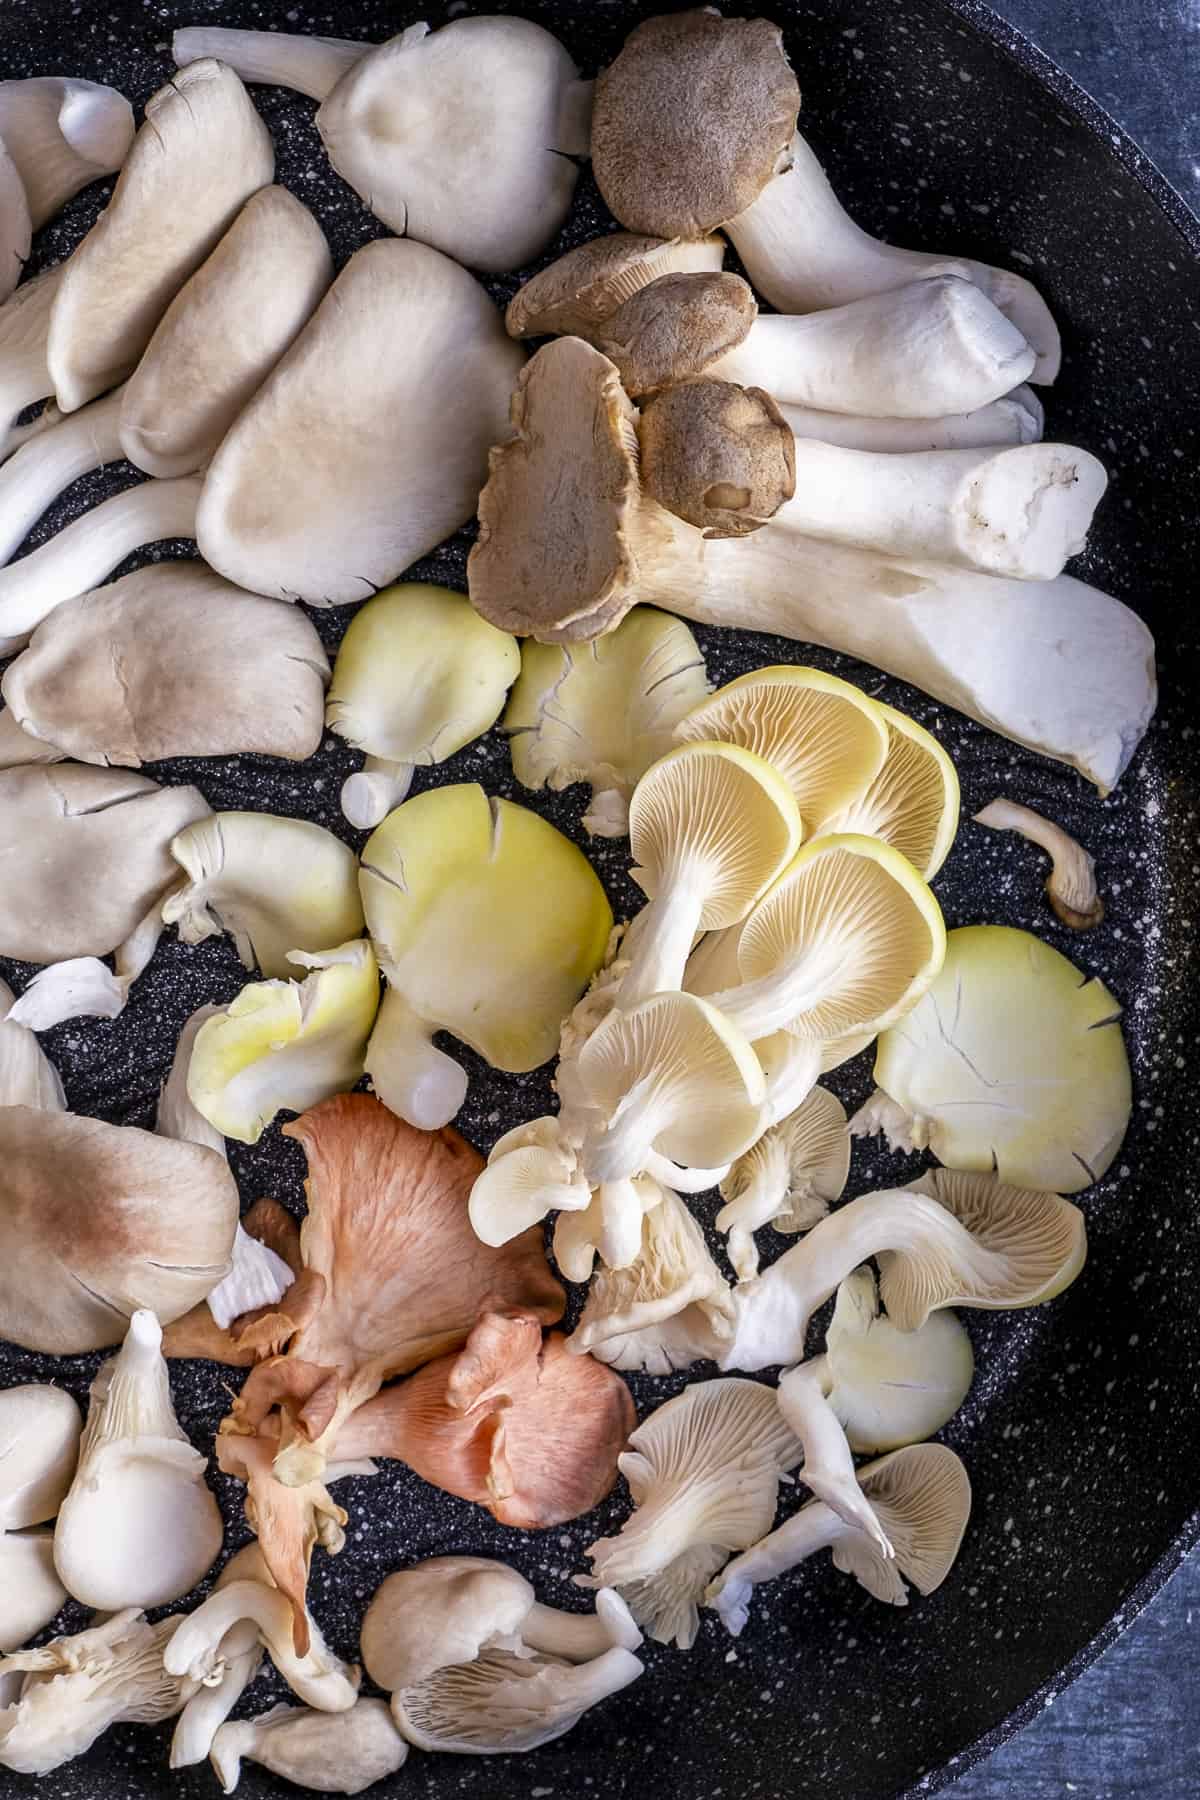 Grey, pink, yellow pearl oyster mushrooms and king oyster mushrooms together in a pan.